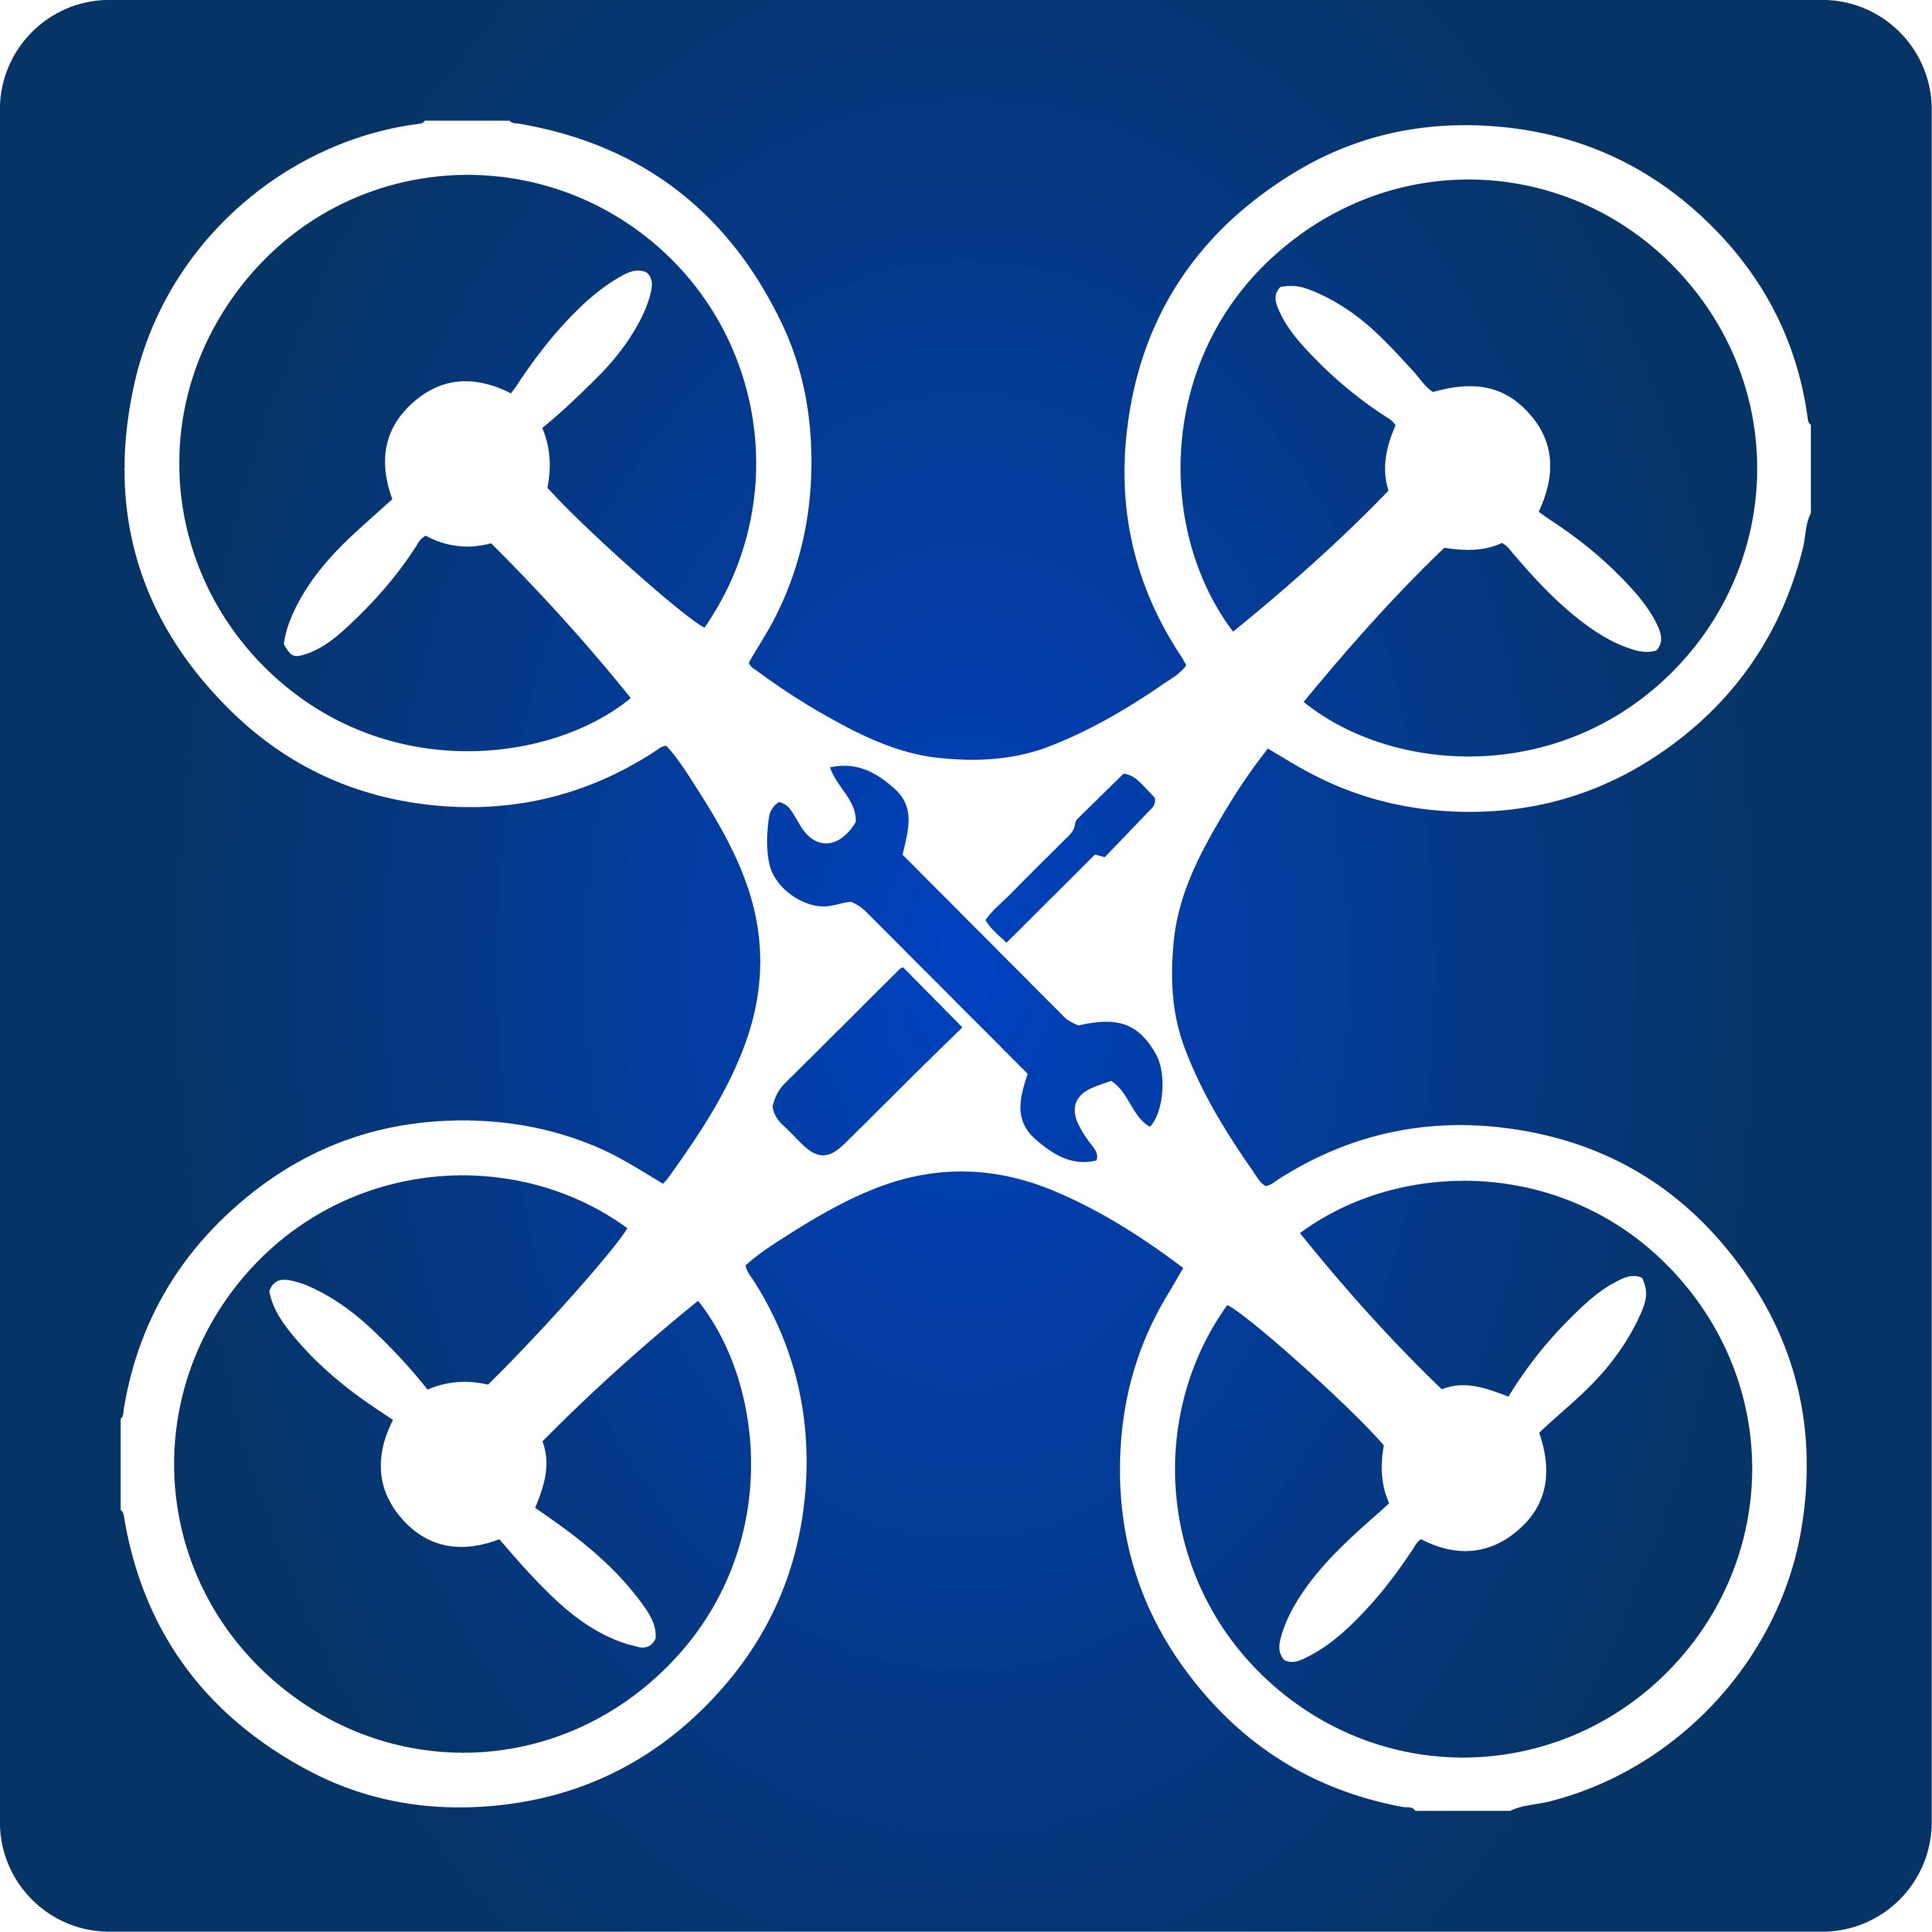 UAS Tool icon - sUAS with screwdriver and wrench in center.